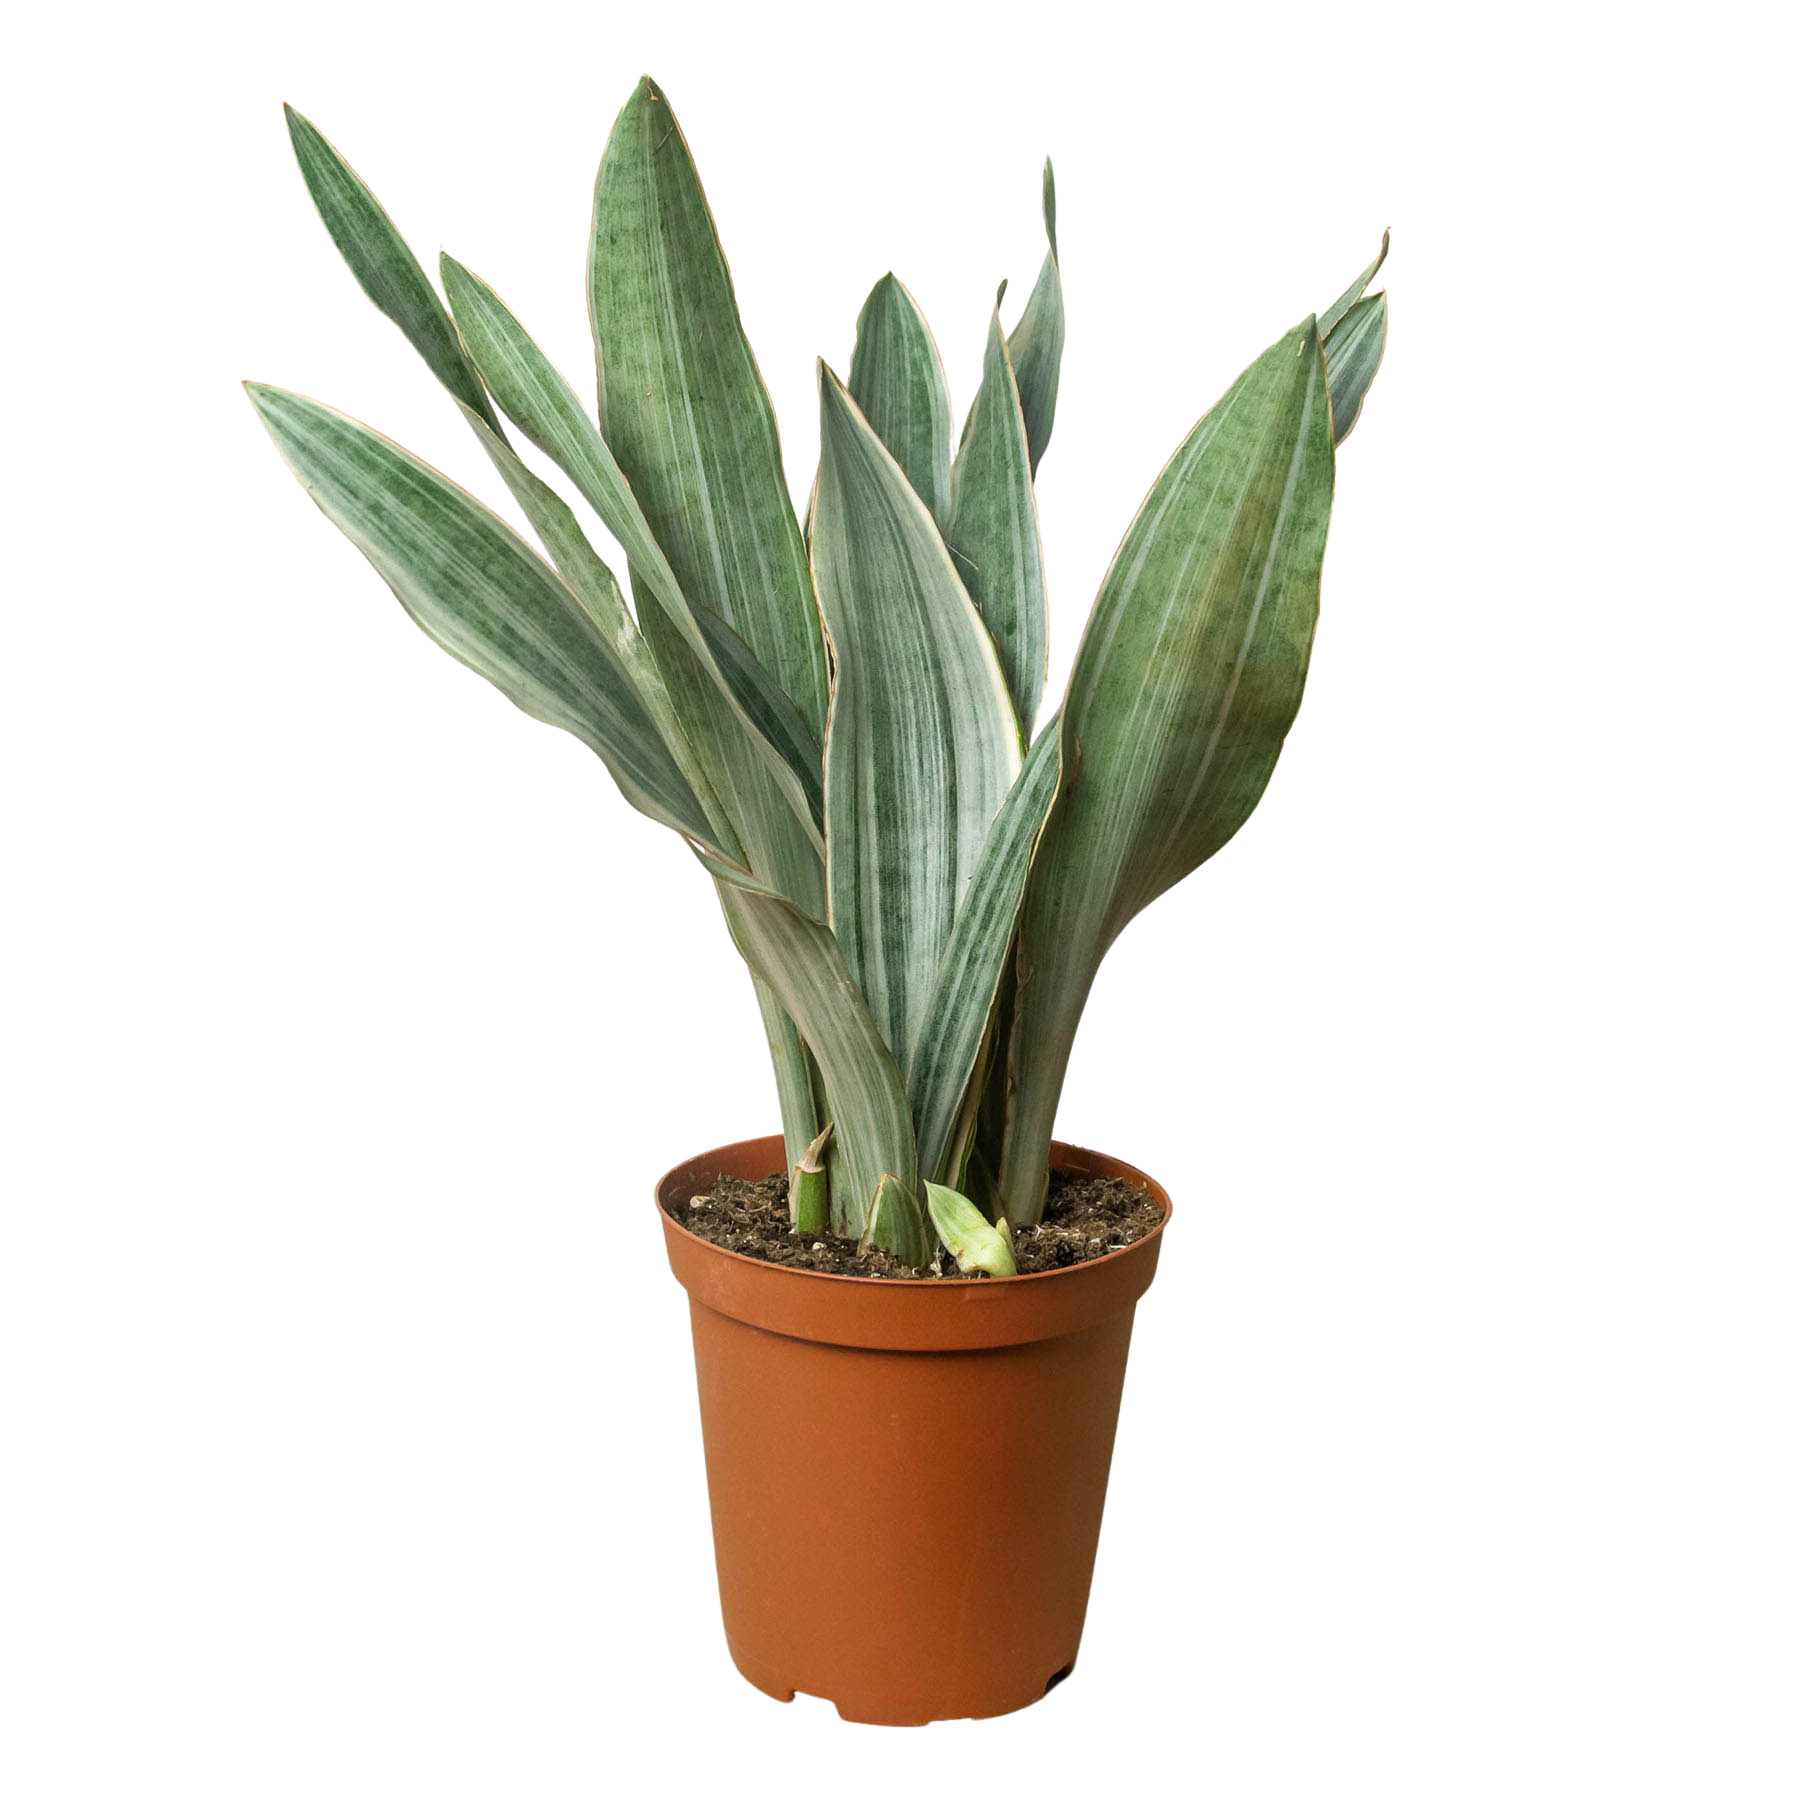 A snake plant in a brown pot on a white background from one of the top plant nurseries near me.